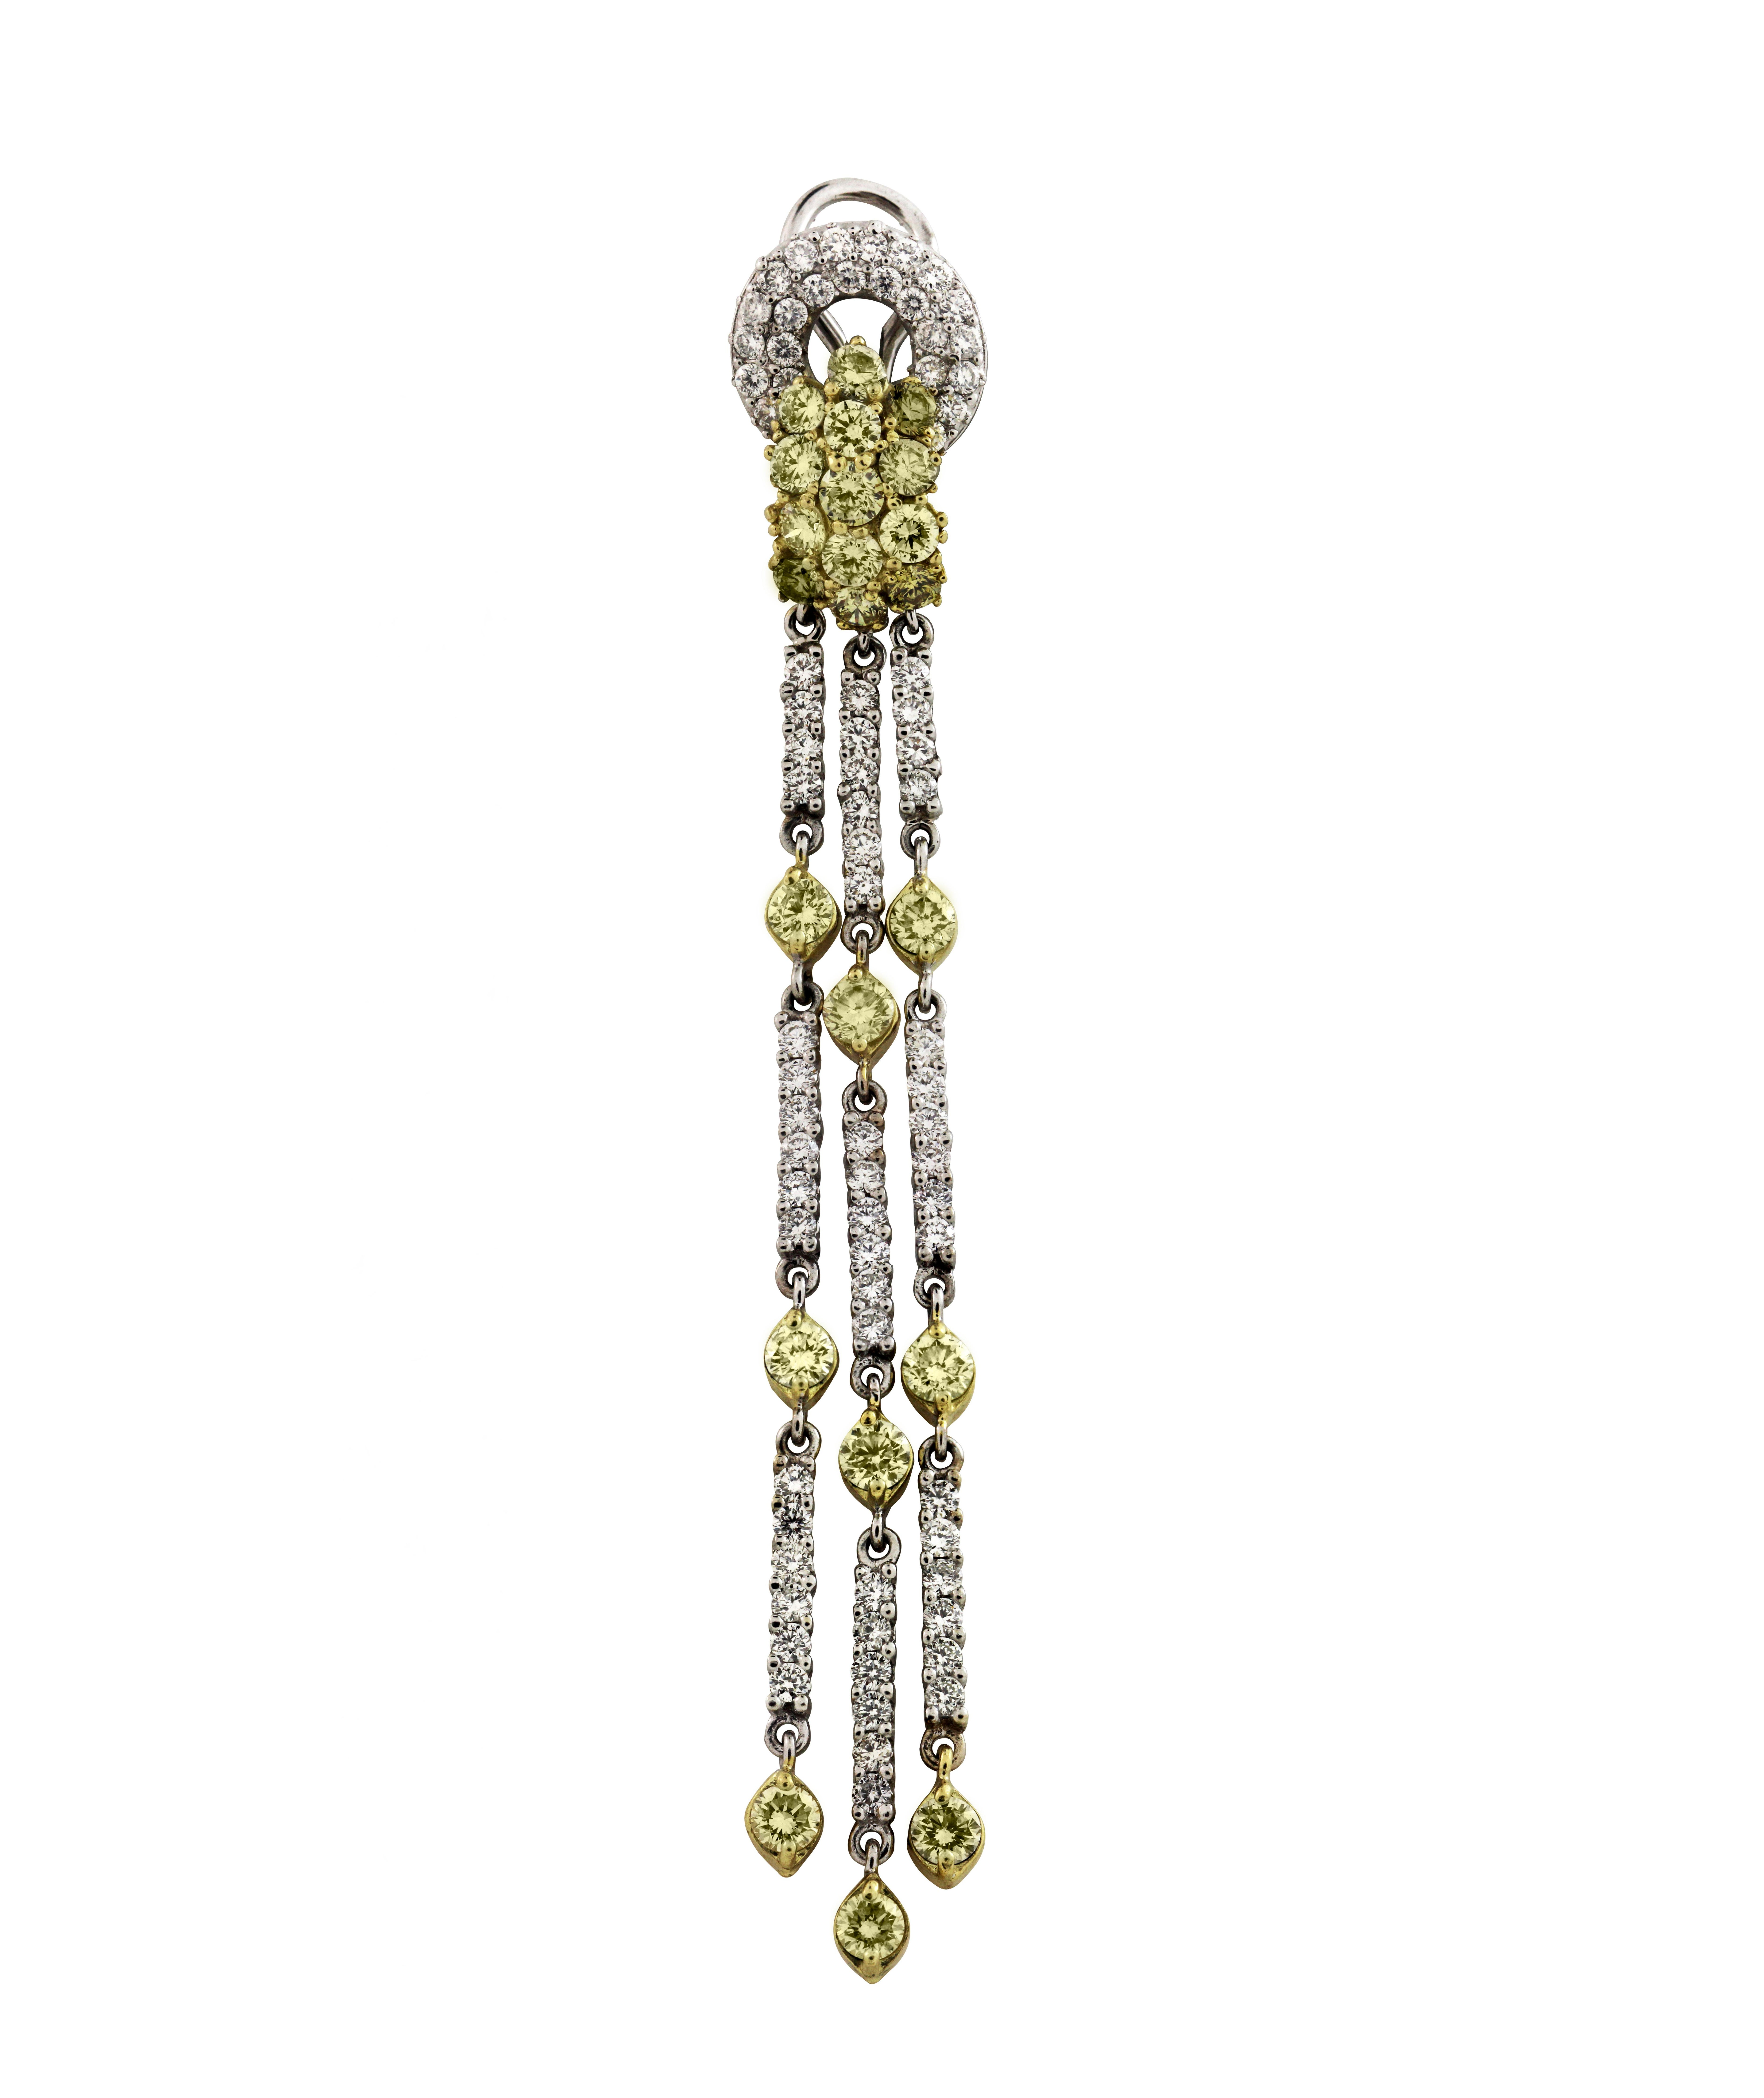 18K Green Yellow and White Two-Tone Gold Gold Chandelier Earrings with Yellow and White Diamonds 

4.12 carat G color, VS clarity white diamonds

5.20 carat Green/Yellow Diamonds. Diamonds are 9.32 carat total weight

These stunning chandelier